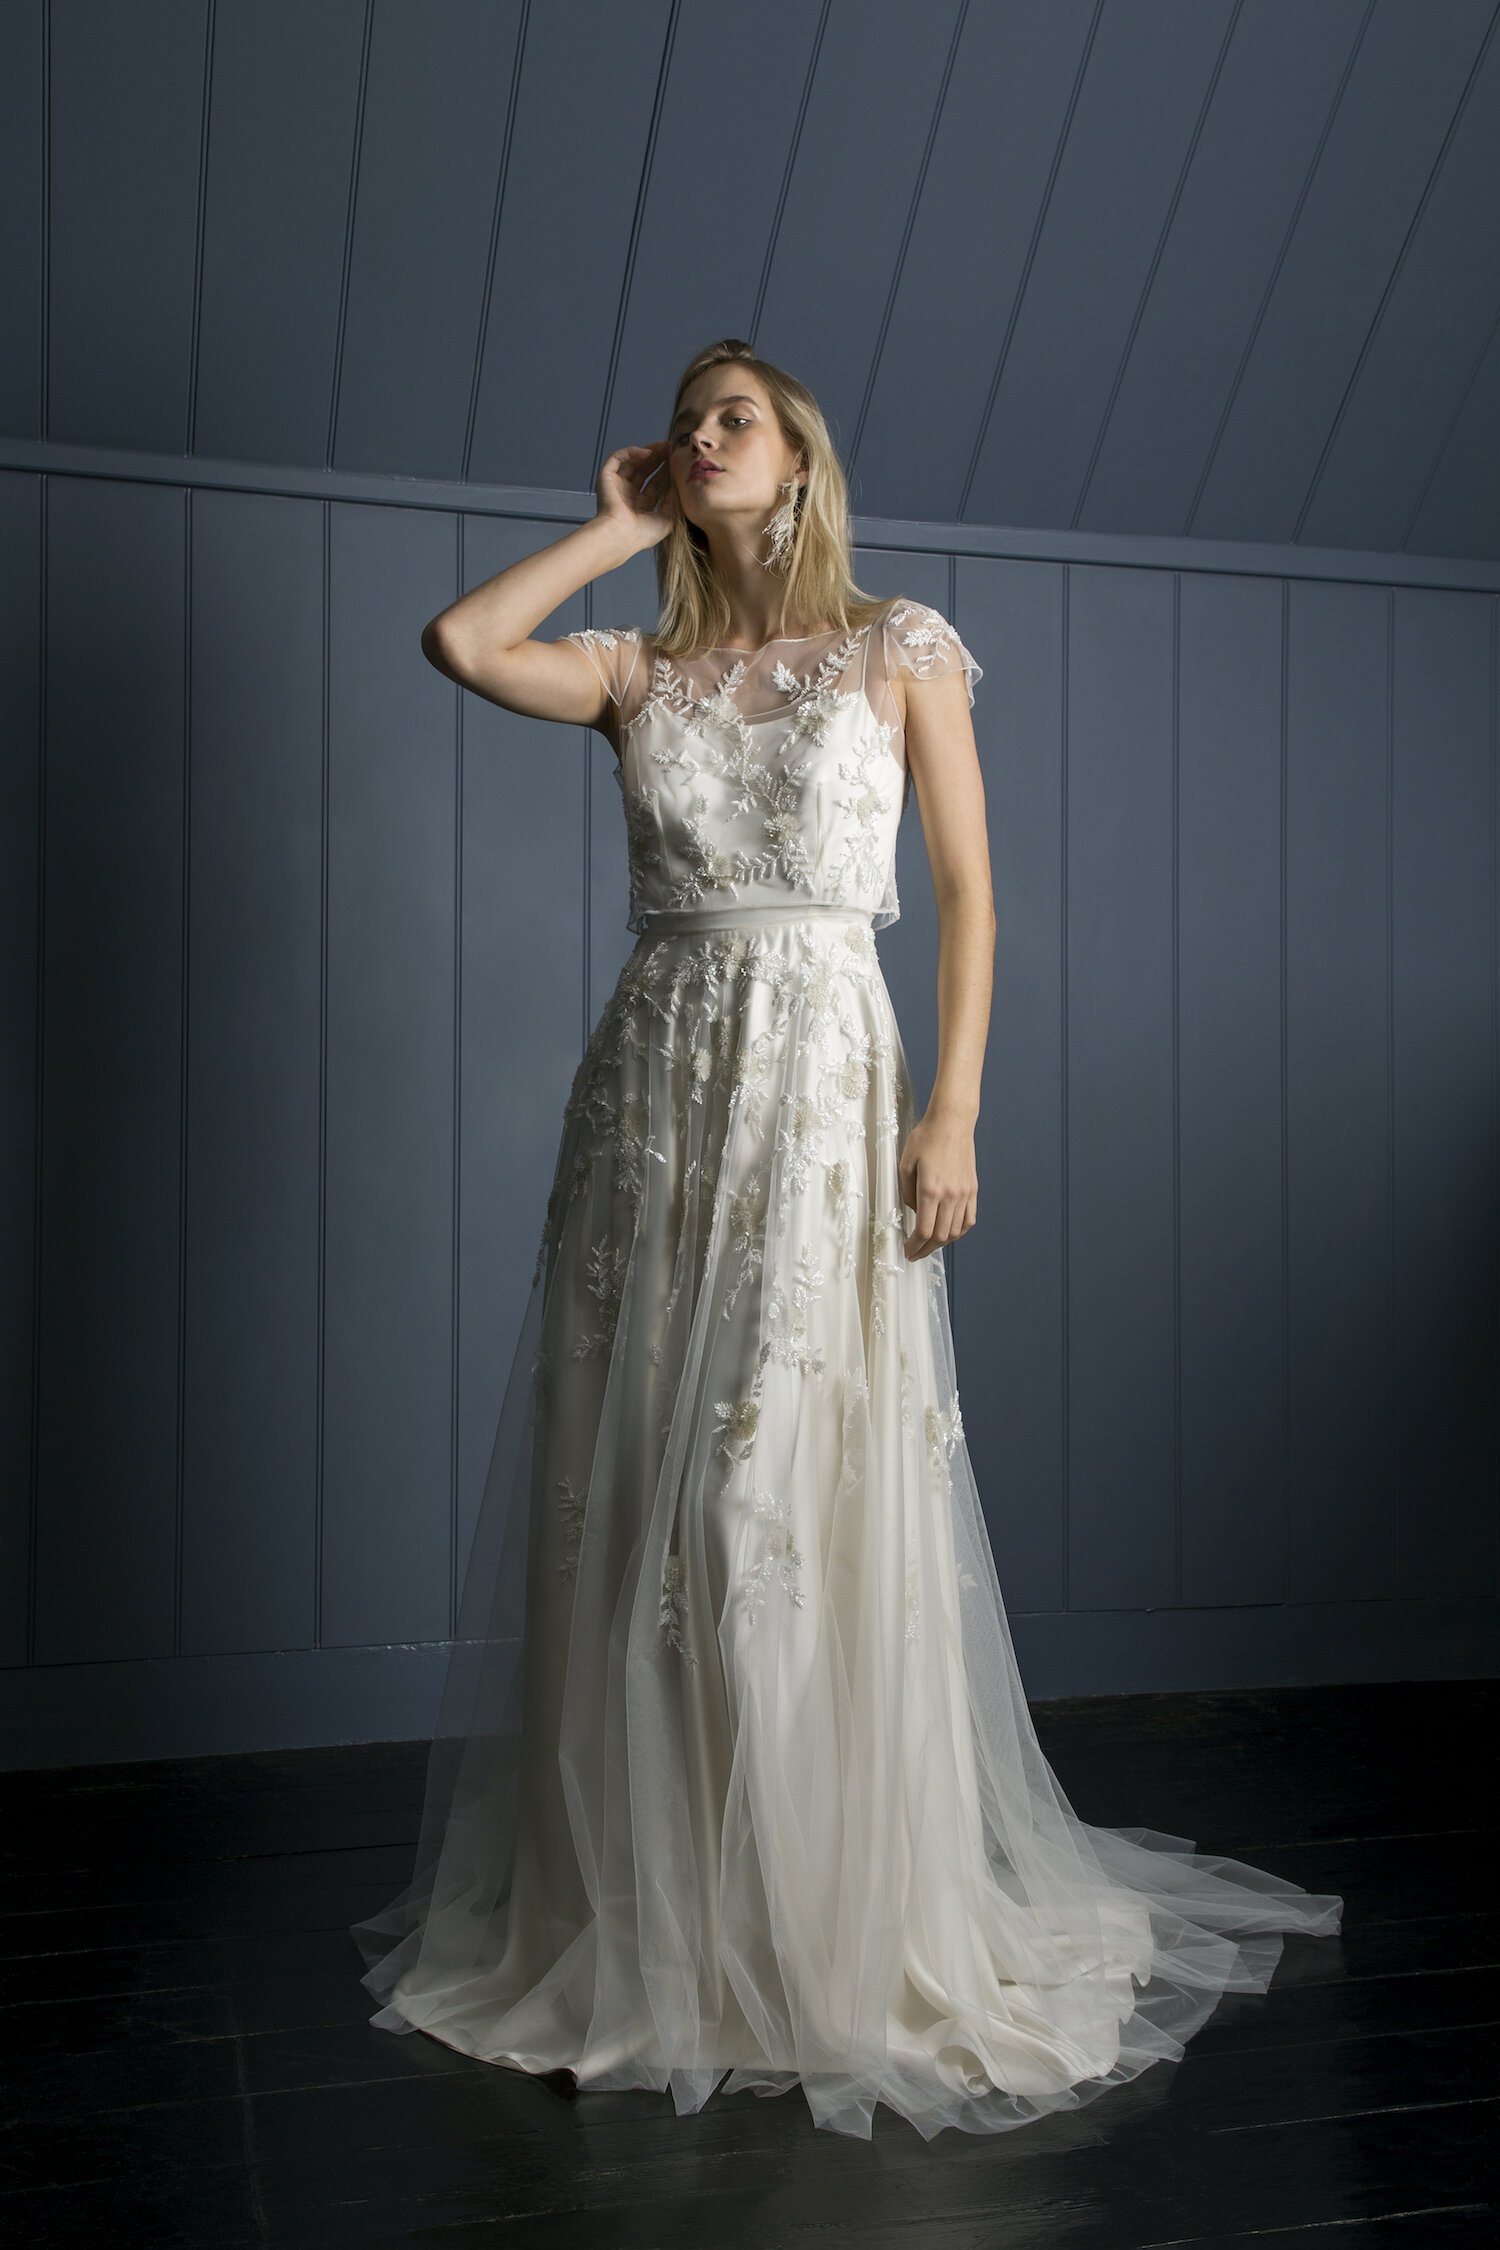 Daydreamer — Halfpenny London Wedding dresses and separates in London